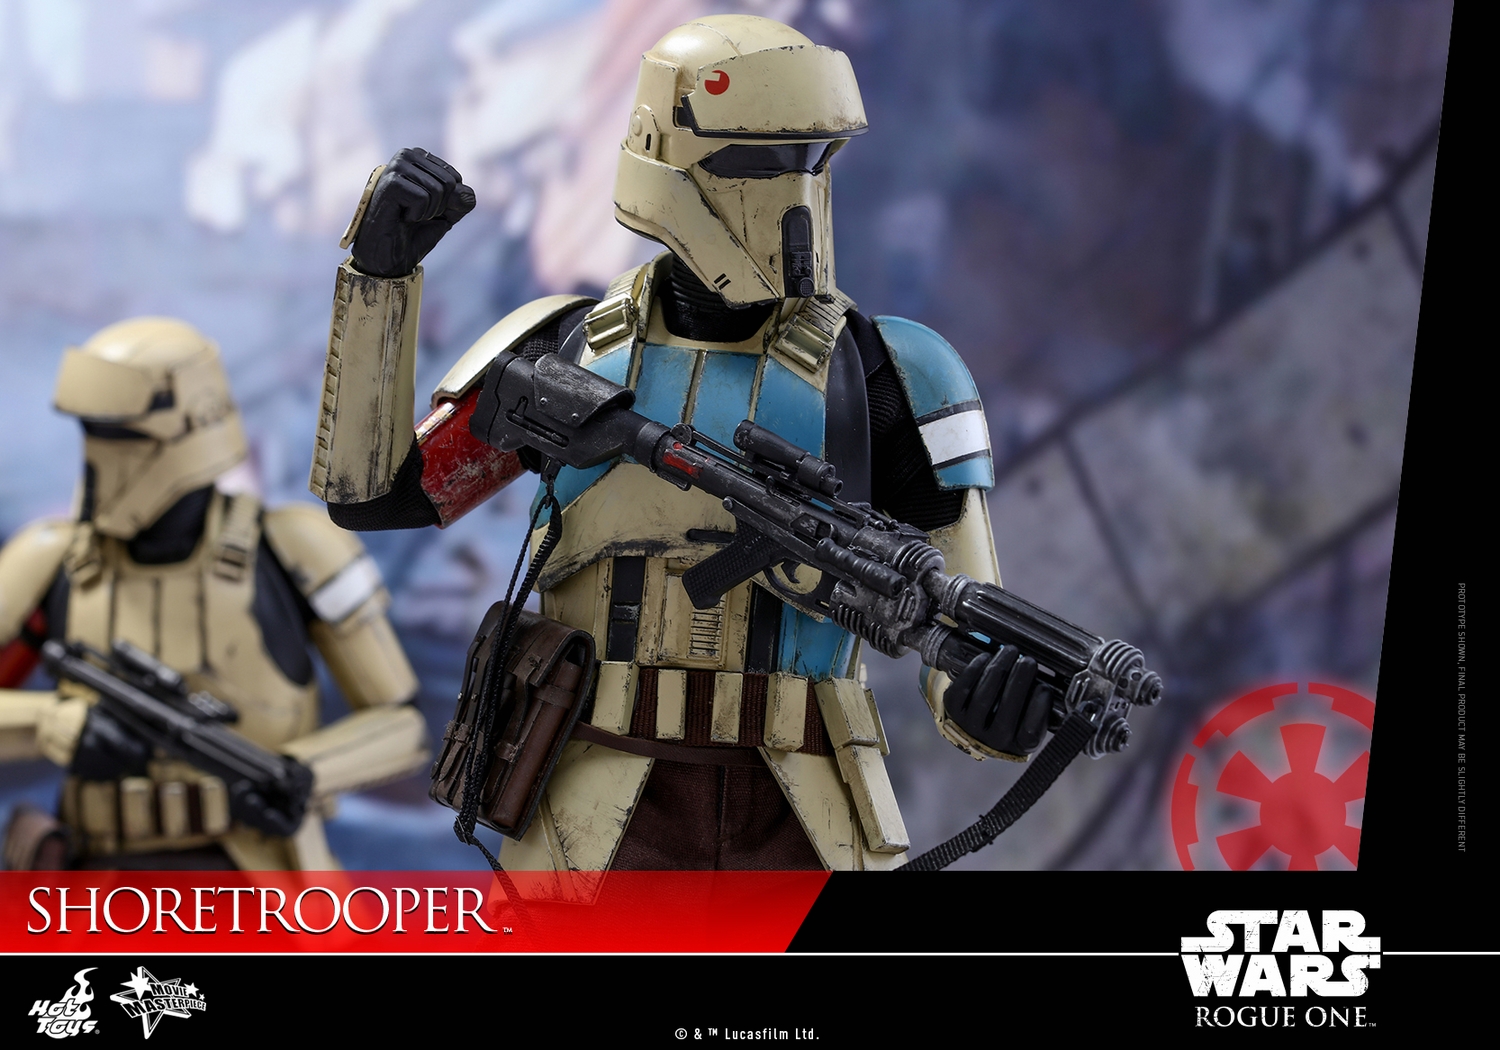 hot-toys-star-wars-rogue-one-shoretrooper-collectible-figure-092916-006.jpg